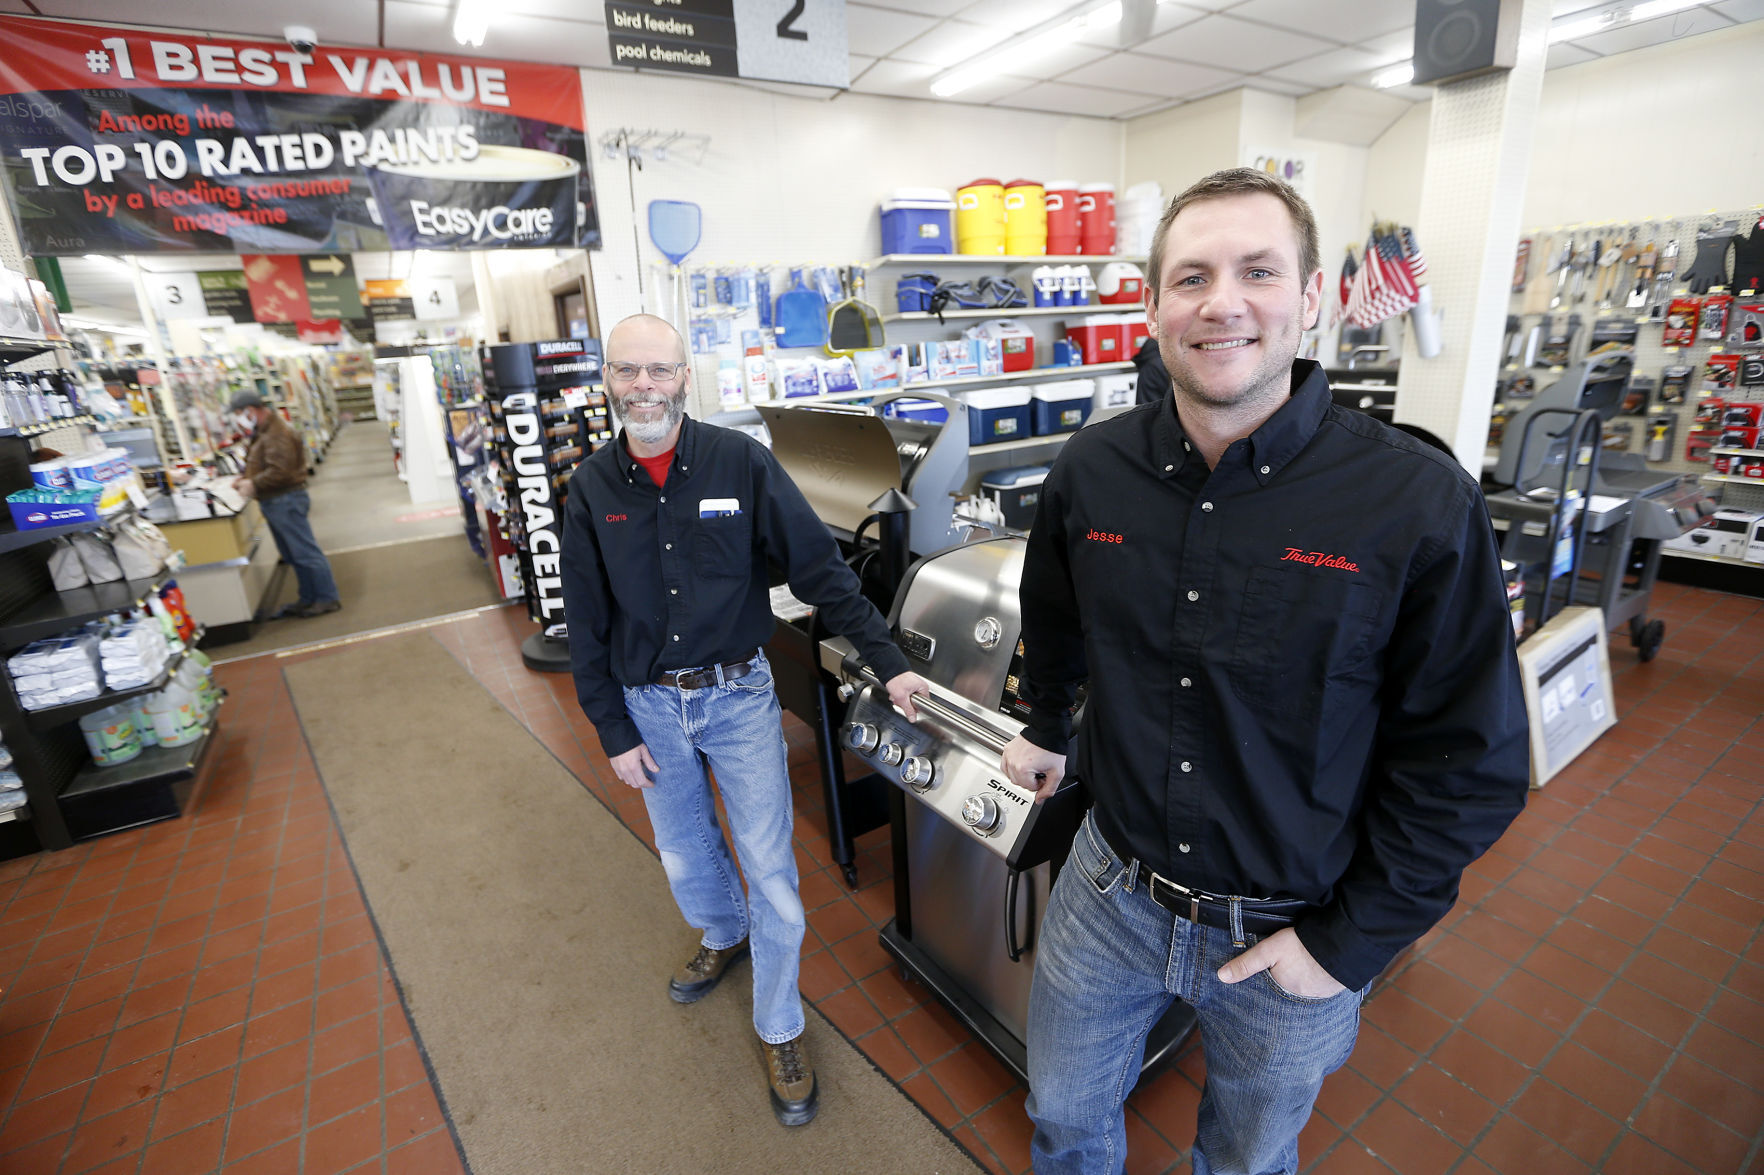 Jesse Kueter (right) recently purchased what is now called Kueter True Value in Bellevue, Iowa, from Chris Lampe, who took over what was then Lampe True Value from his parents, Larry and Maryetta Lampe, 27 years ago. PHOTO CREDIT: Dave Kettering